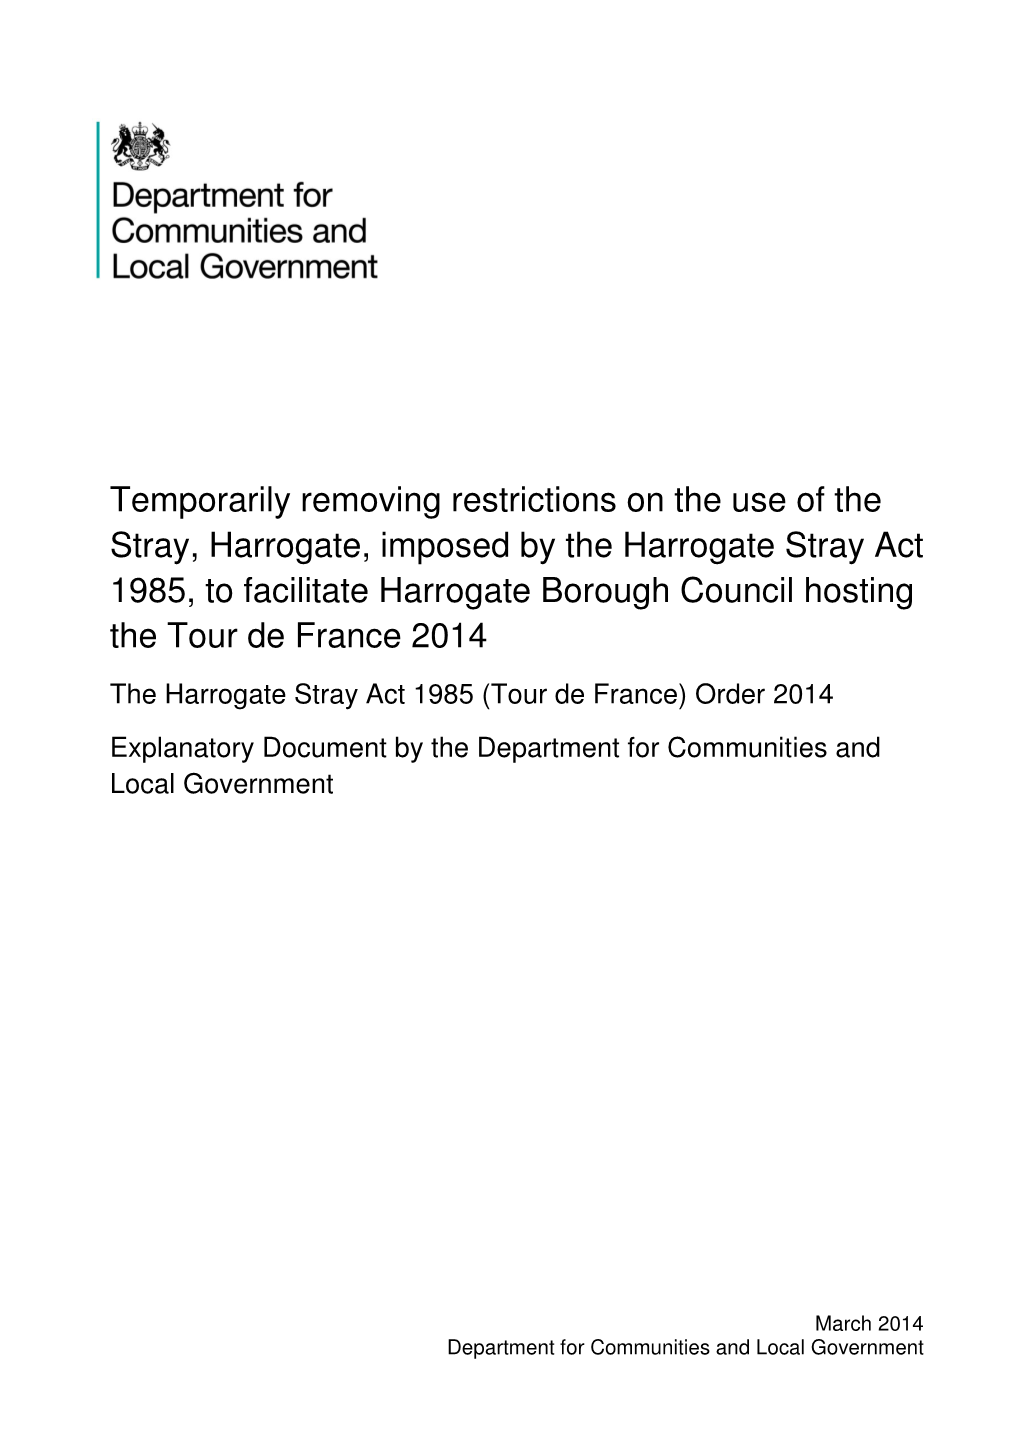 The Harrogate Stray Act 1985 (Tour De France) Order 2014 Explanatory Document by the Department for Communities and Local Government